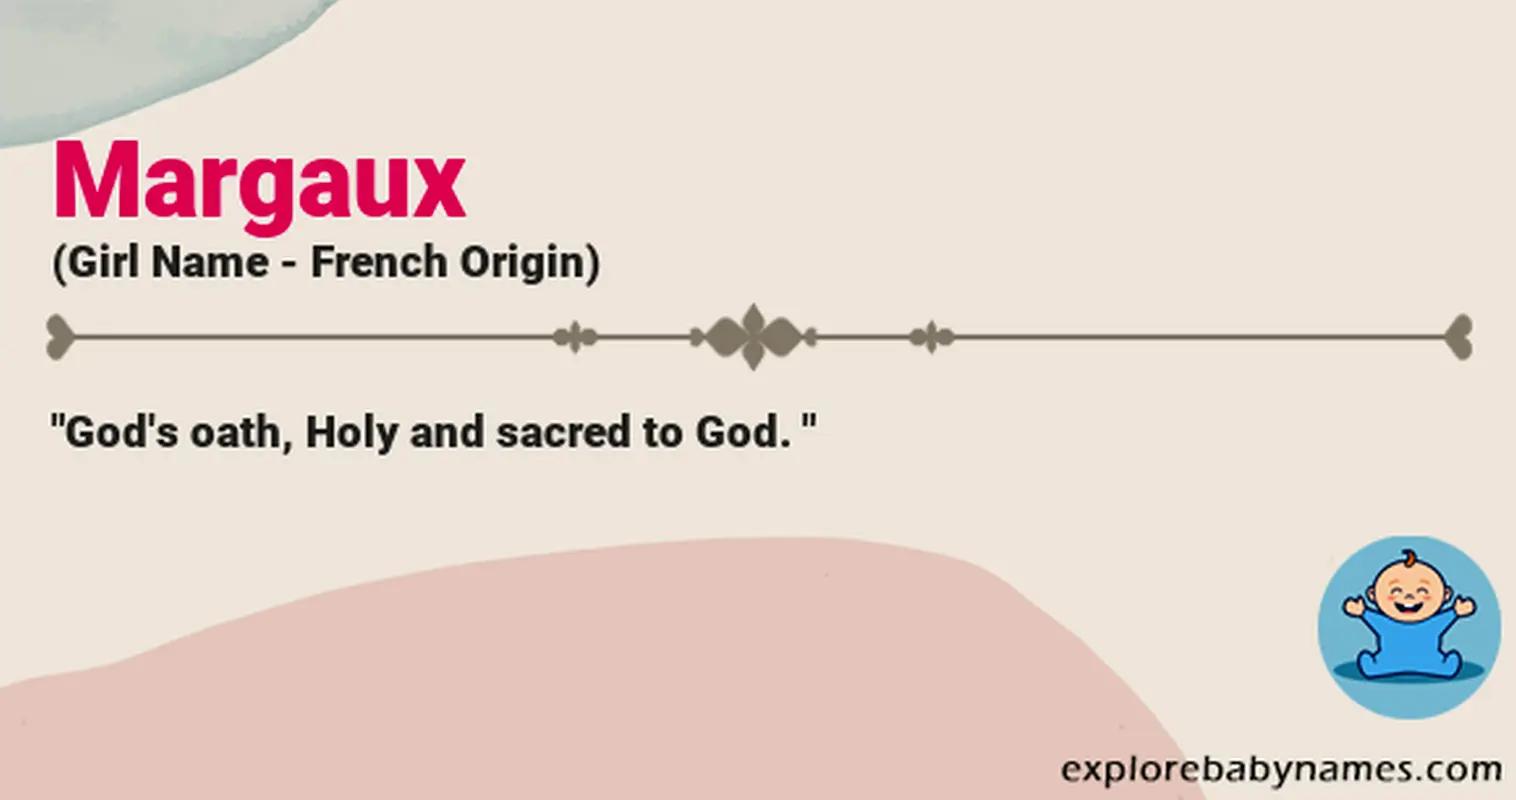 Meaning of Margaux